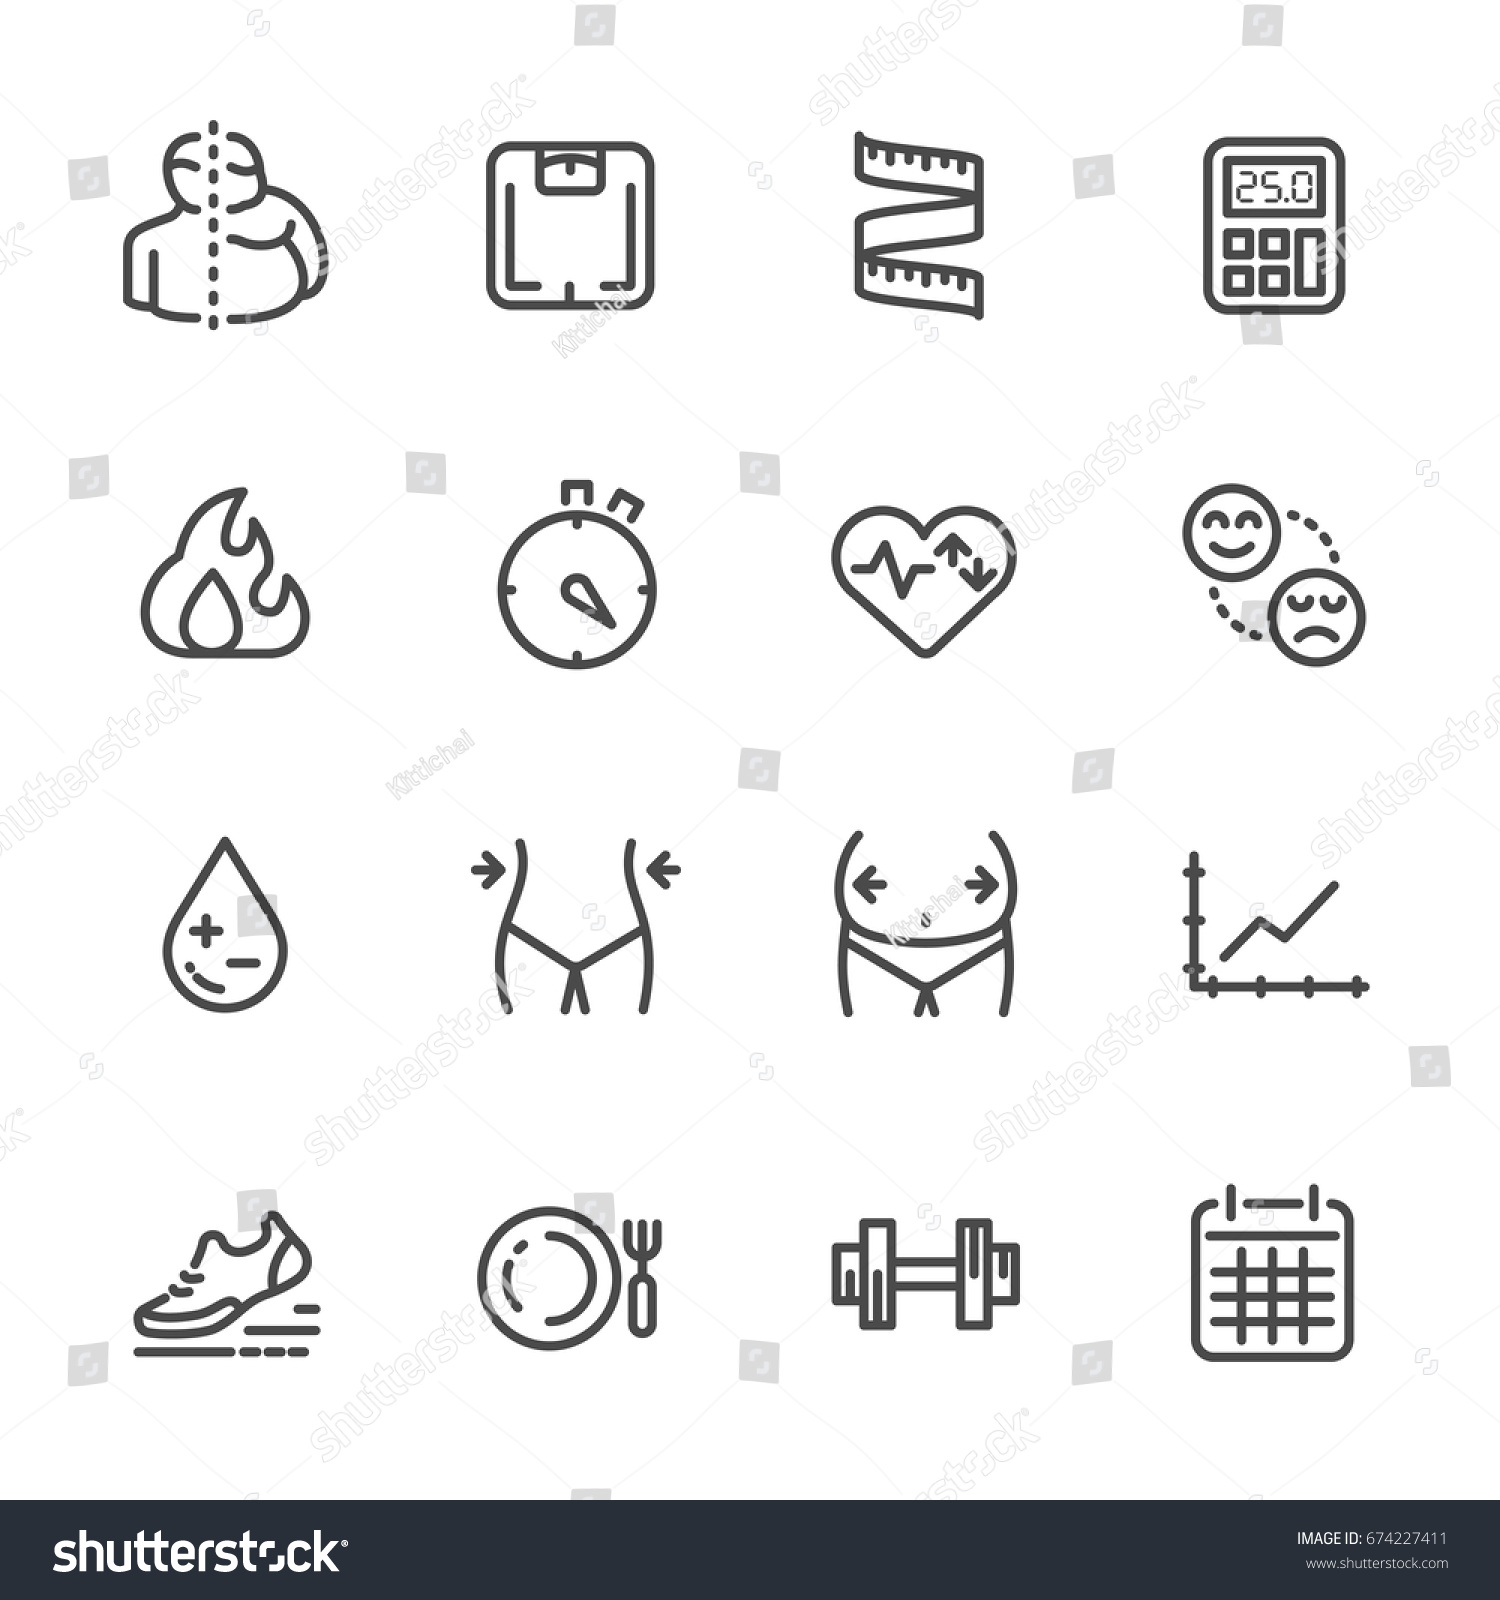 SVG of Measurement for obesity, its effects and lifestyle change for prevention. vector line icons svg